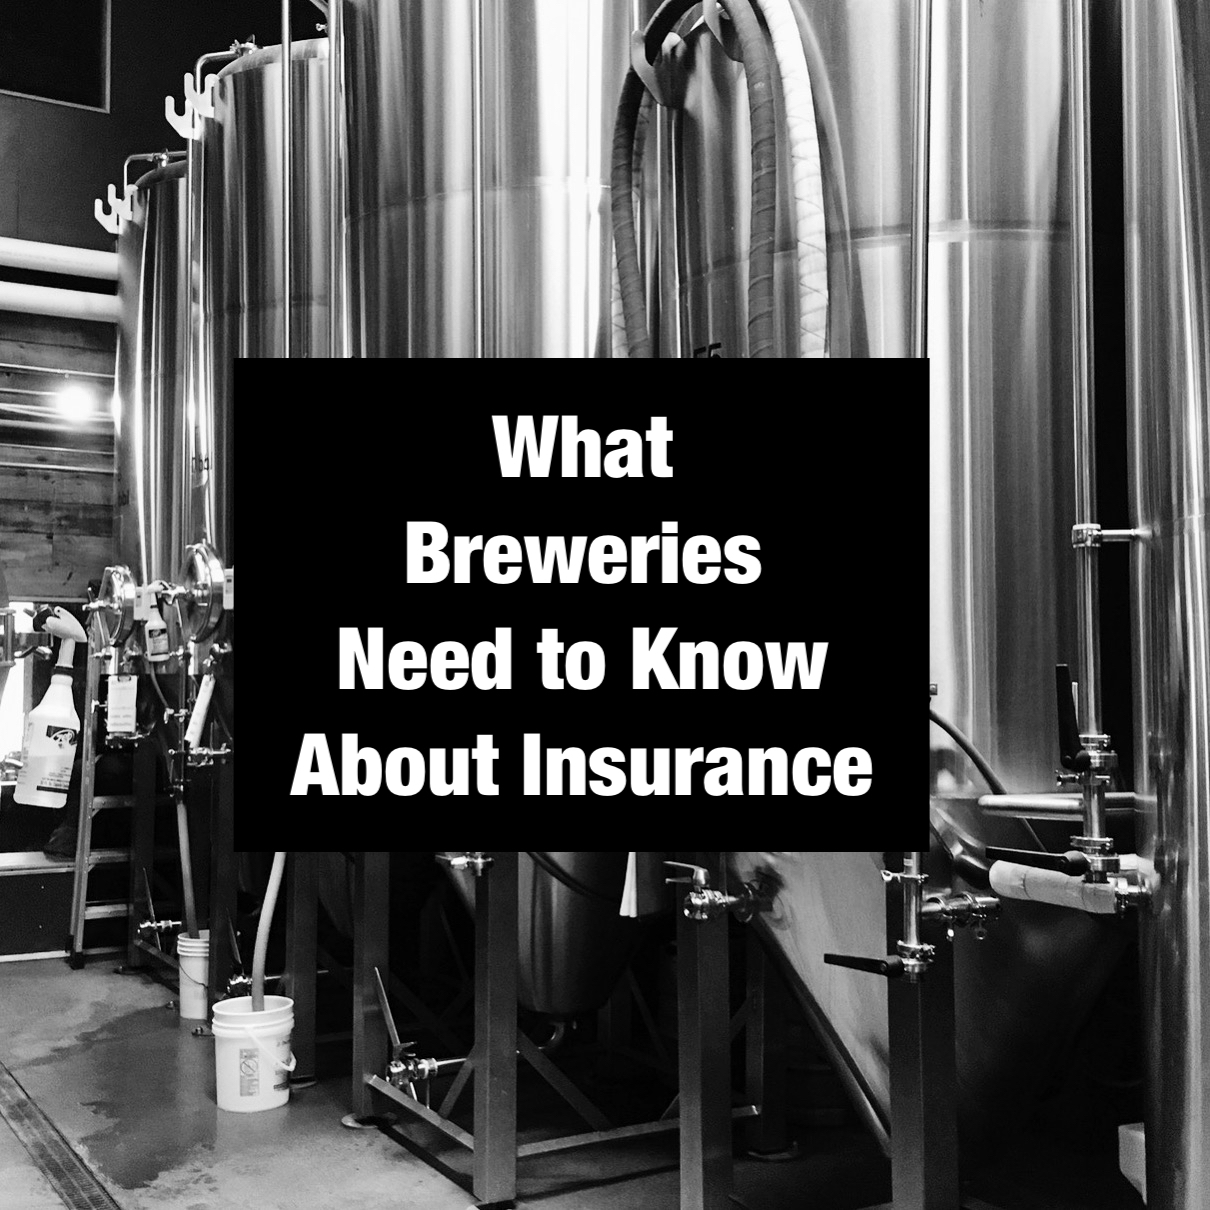 What Breweries Need to Know About Insurance - Portland Beer Podcast Episode 92 by Steven Shomler